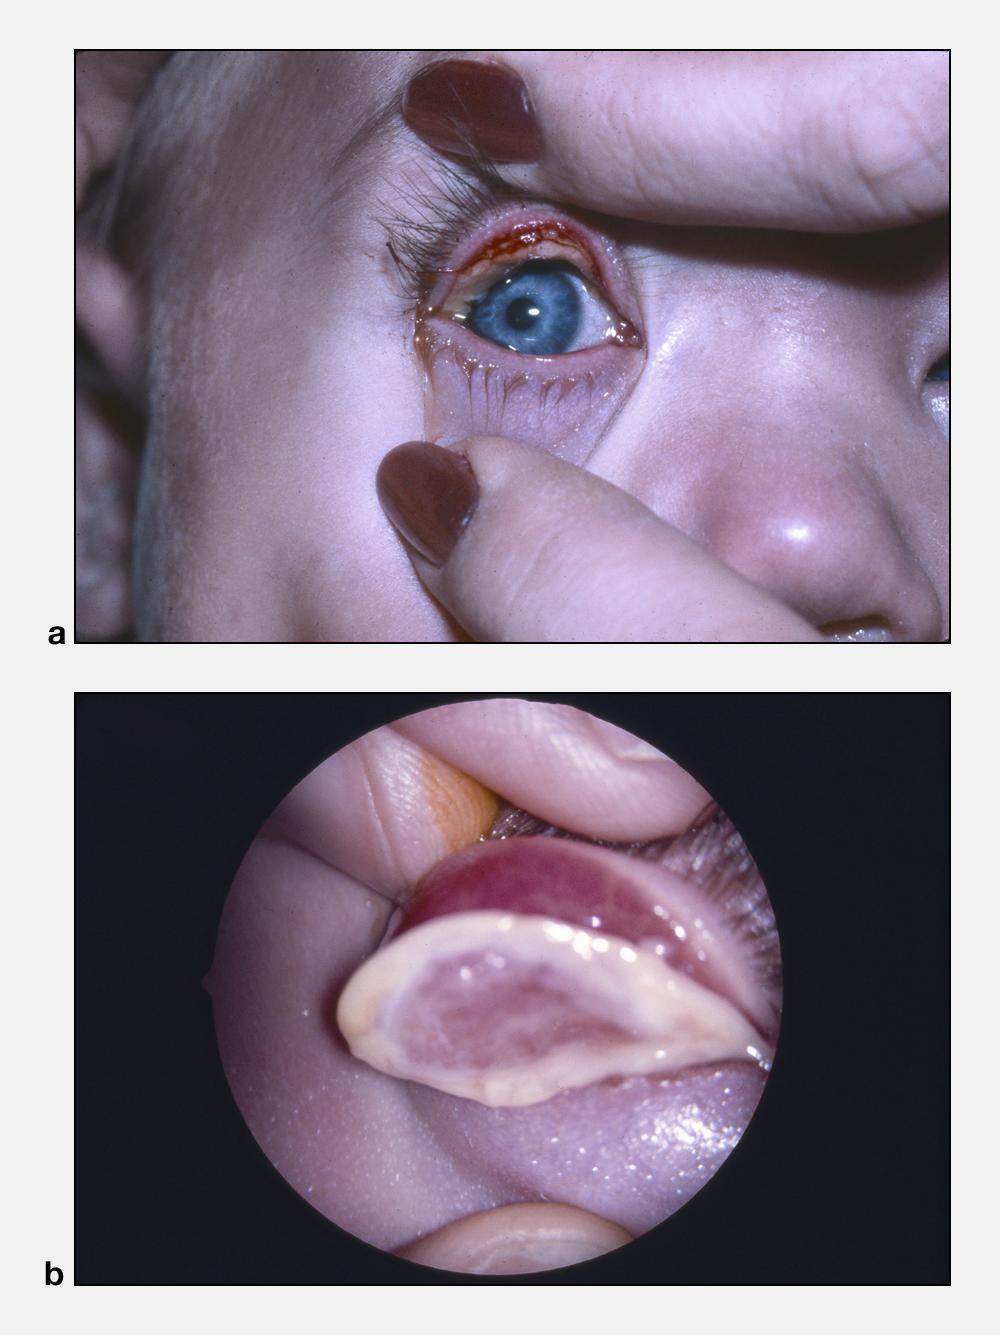 Ligneous conjunctivitis - American Academy of Ophthalmology